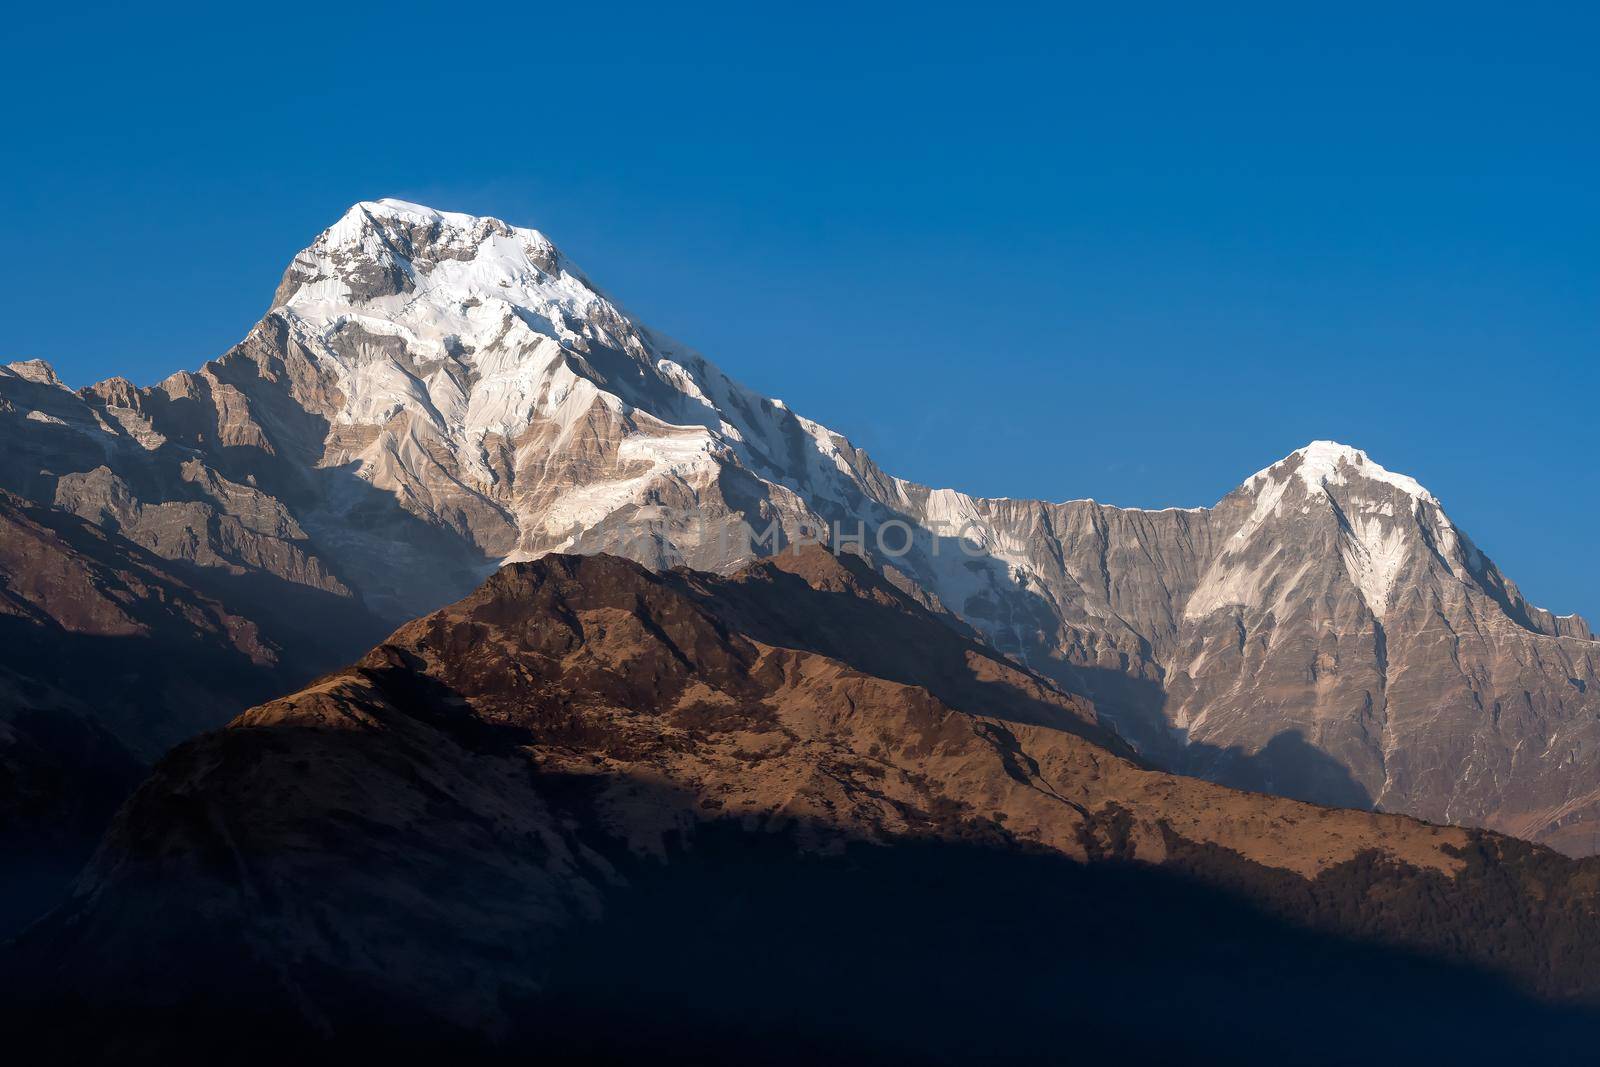 Annapurna South mountain peak with blue sky background in Nepal by Nuamfolio